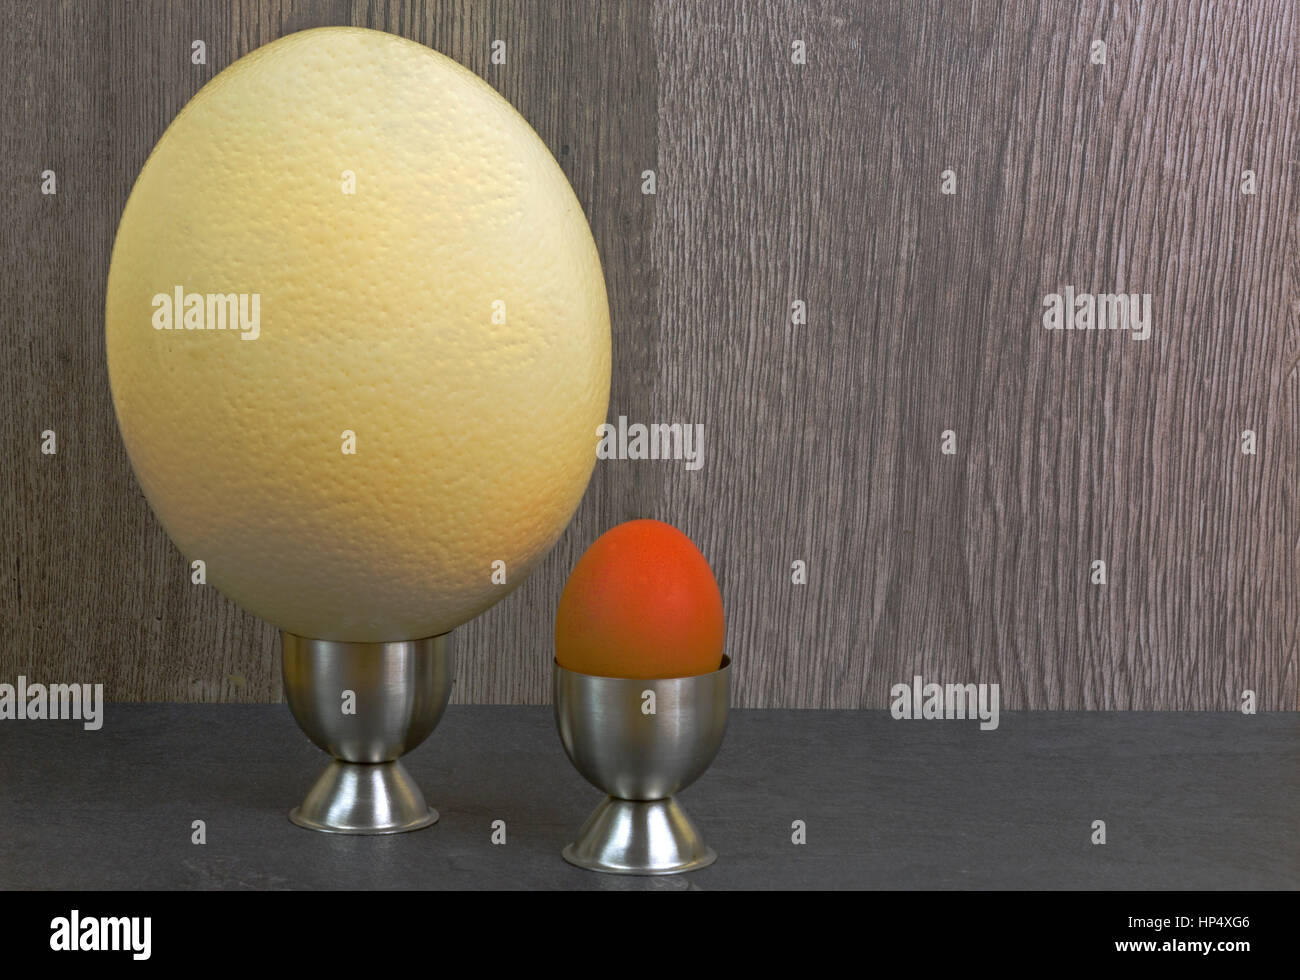 Ostrich egg and hen egg in the stands on a wooden background. Comparison of the size of eggs. Close, horizontal view. Stock Photo